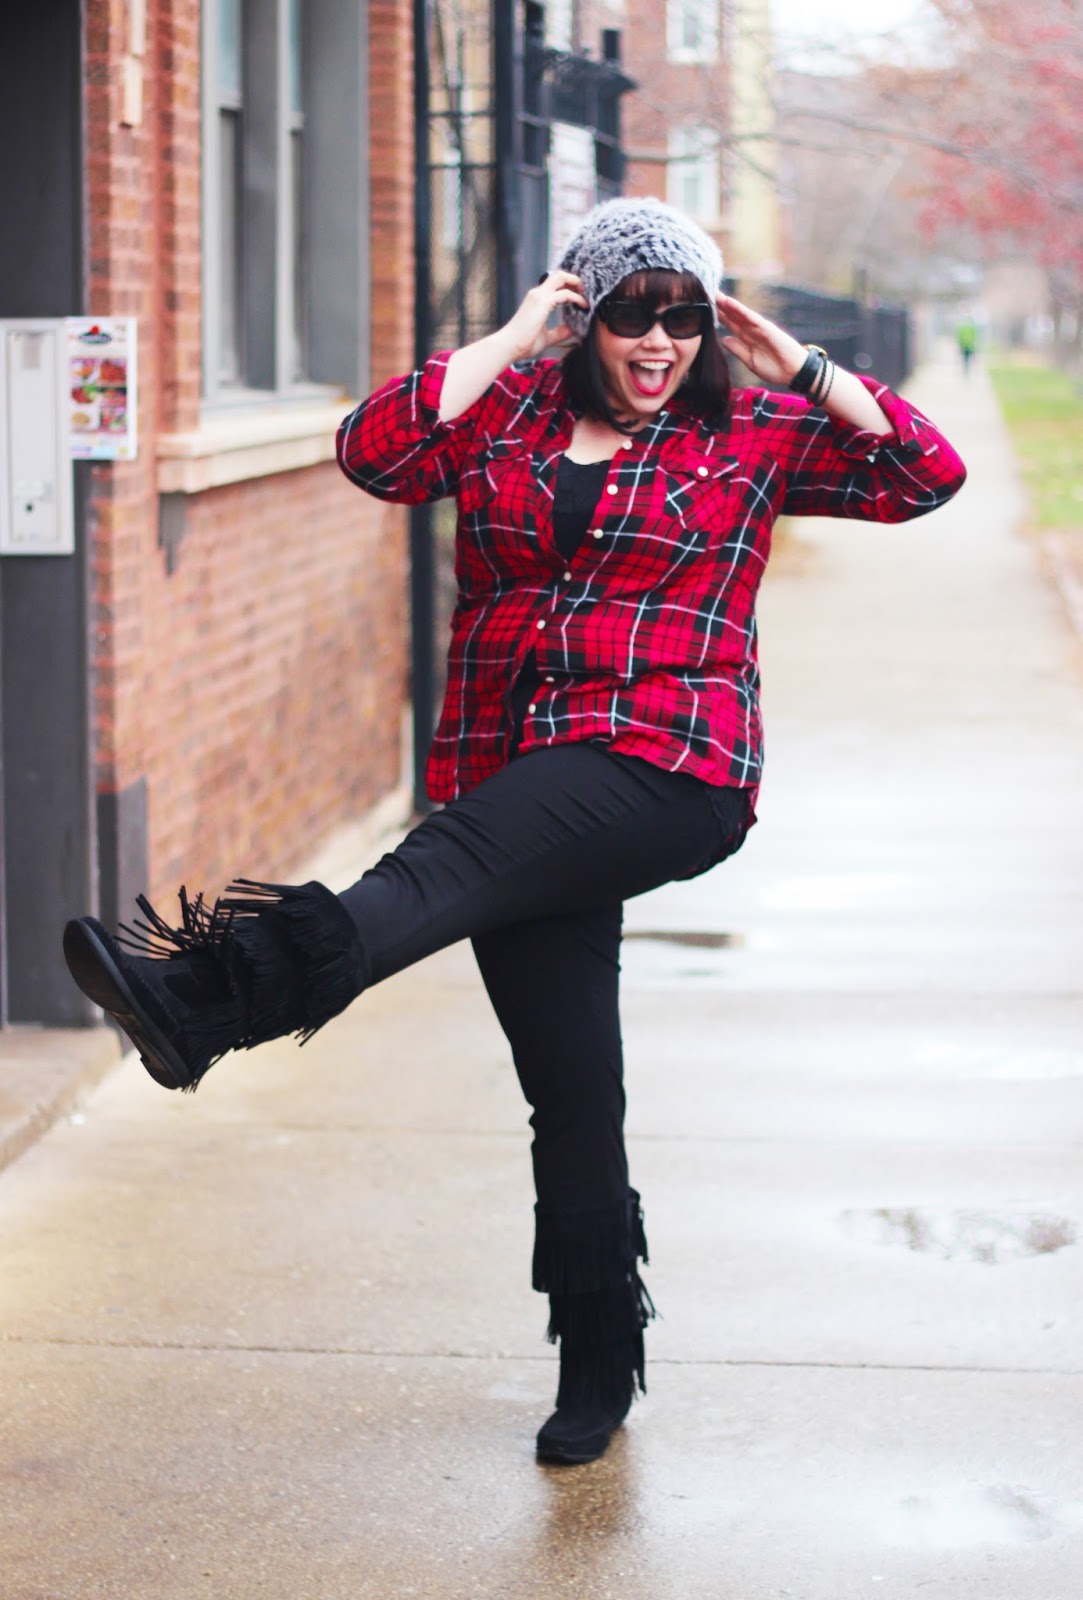 Plus Size Winter Wardrobe: Fringe and Plaid from Fullbeauty.com